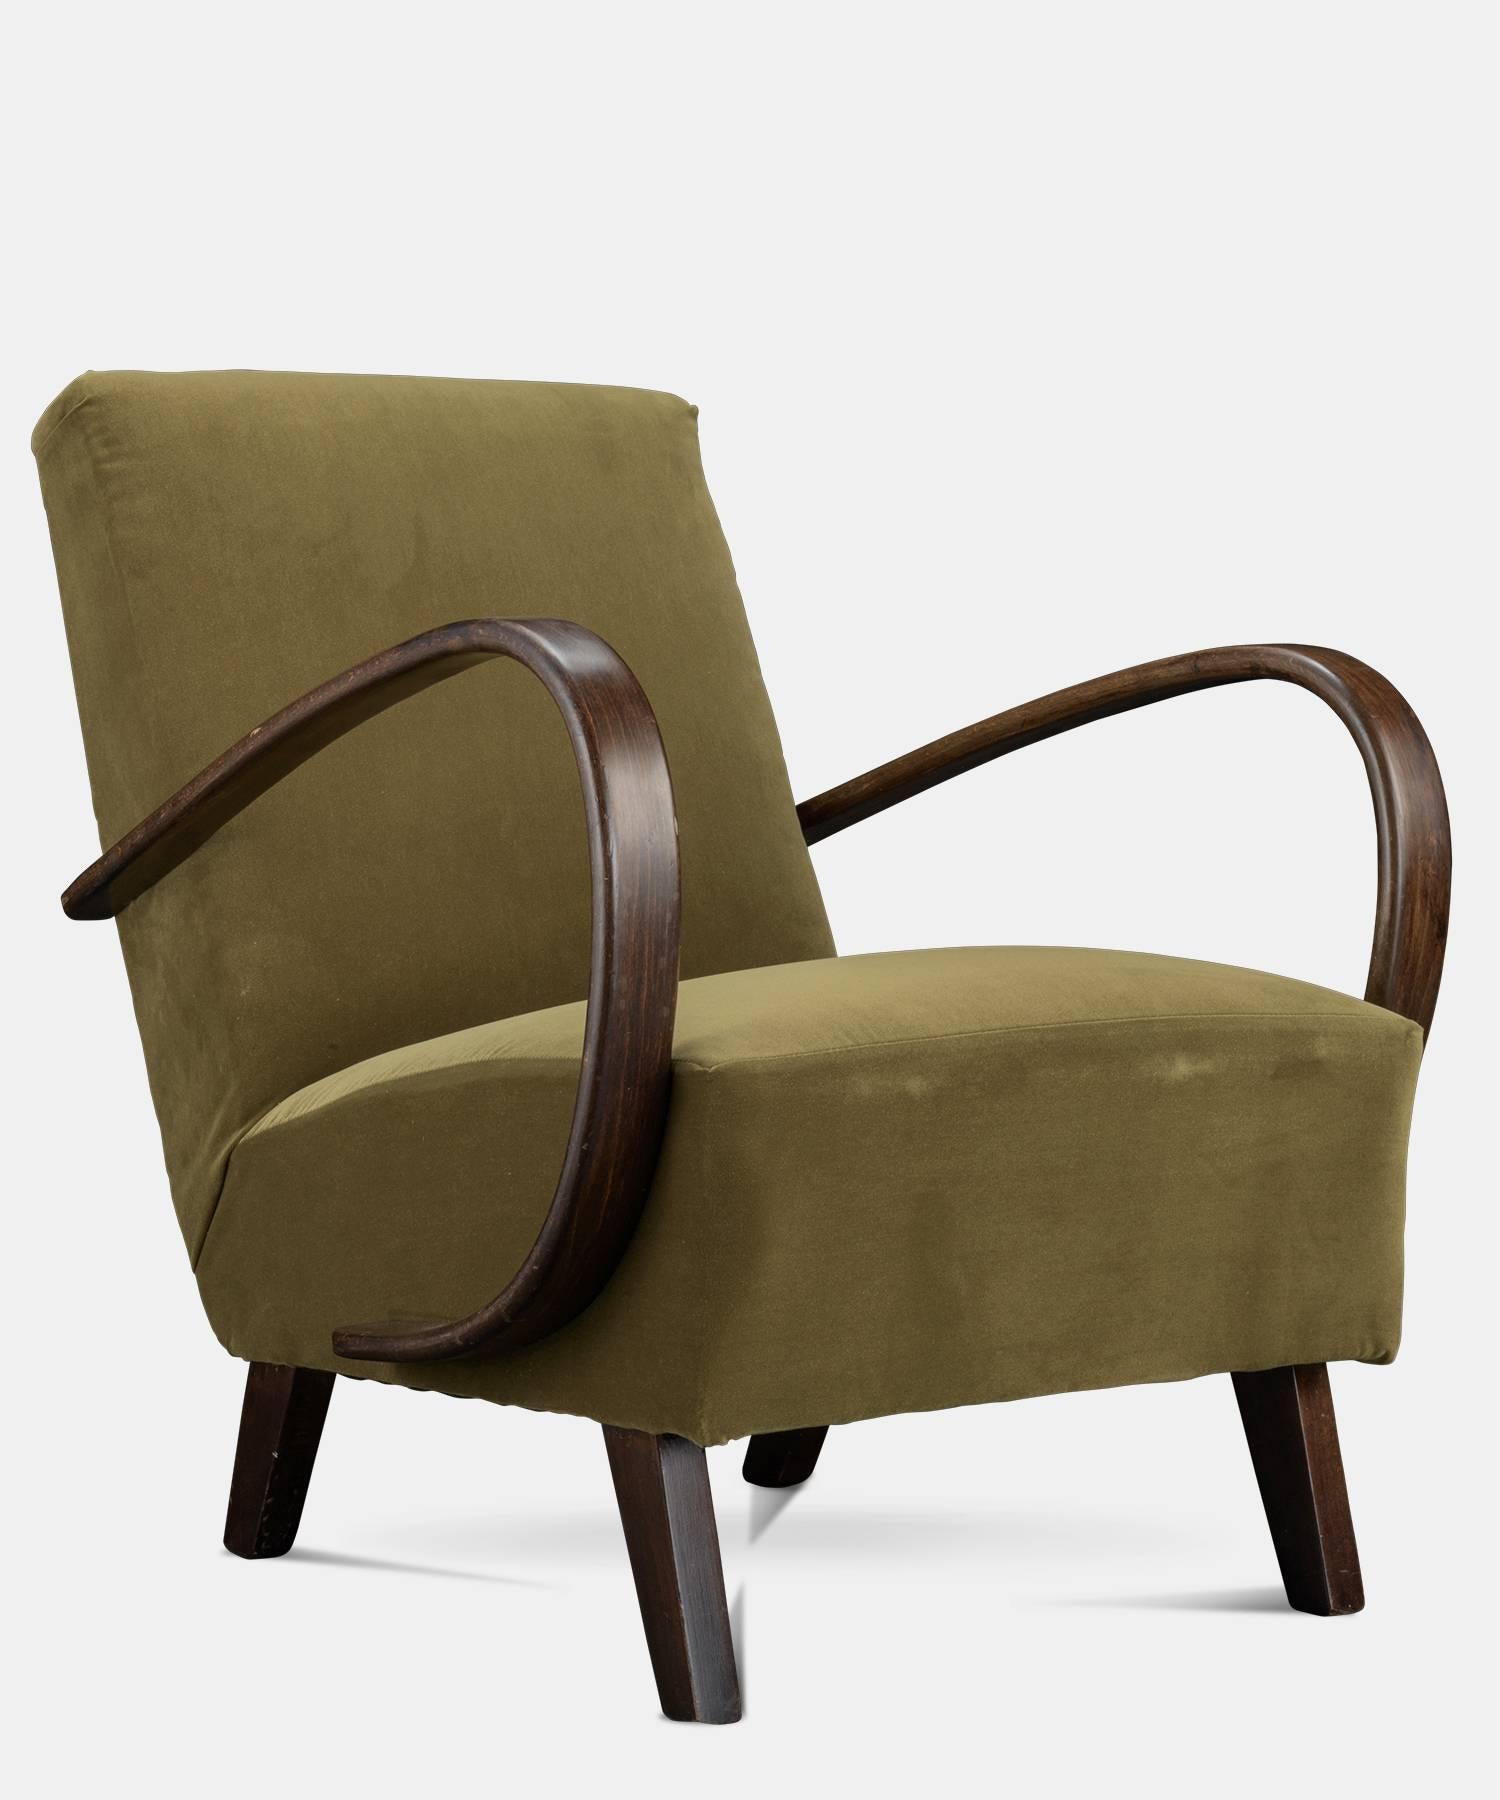 Jindrich Halabala velvet and bentwood modern armchair, circa 1930.

Newly reupholstered in period velvet with bentwood arms. Manufactured by Spojene UP Zabody.